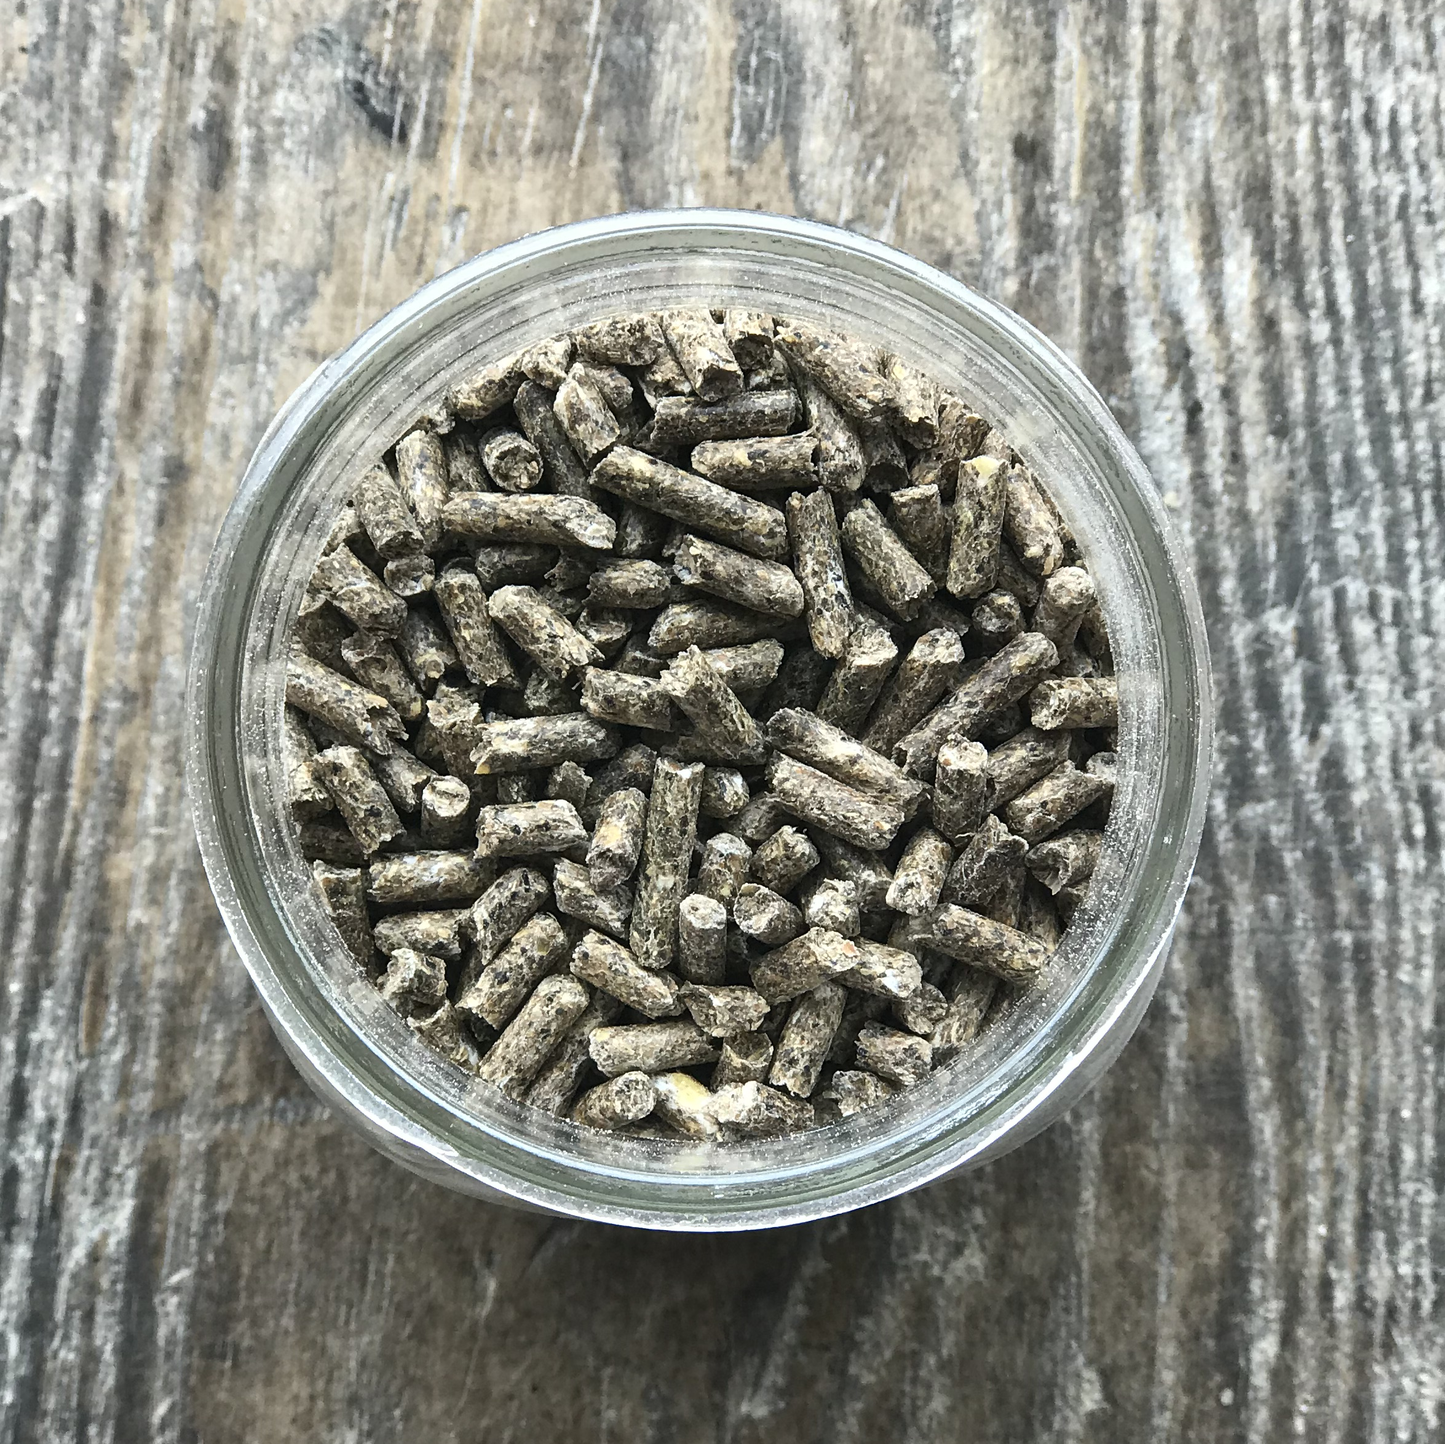 Homestead Harvest Non-GMO Rabbit Pellets For growing and mature rabbits